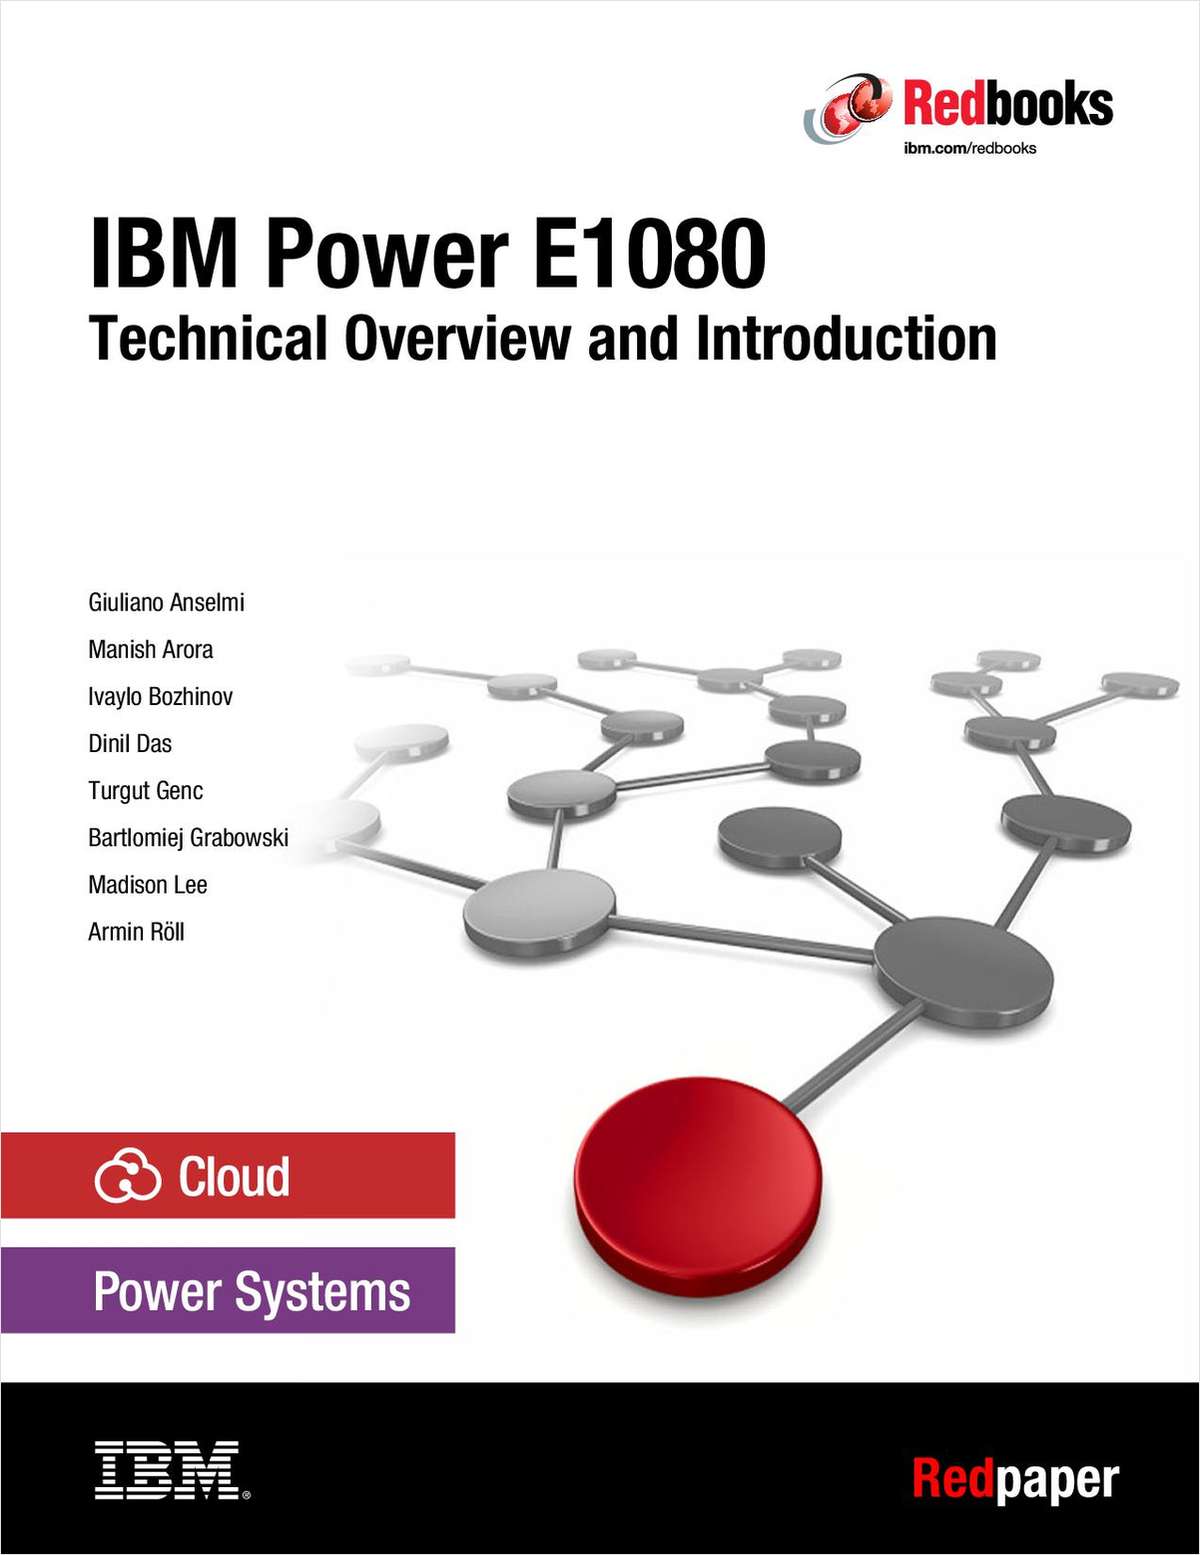 IBM Power E1080: Technical Overview and Introduction